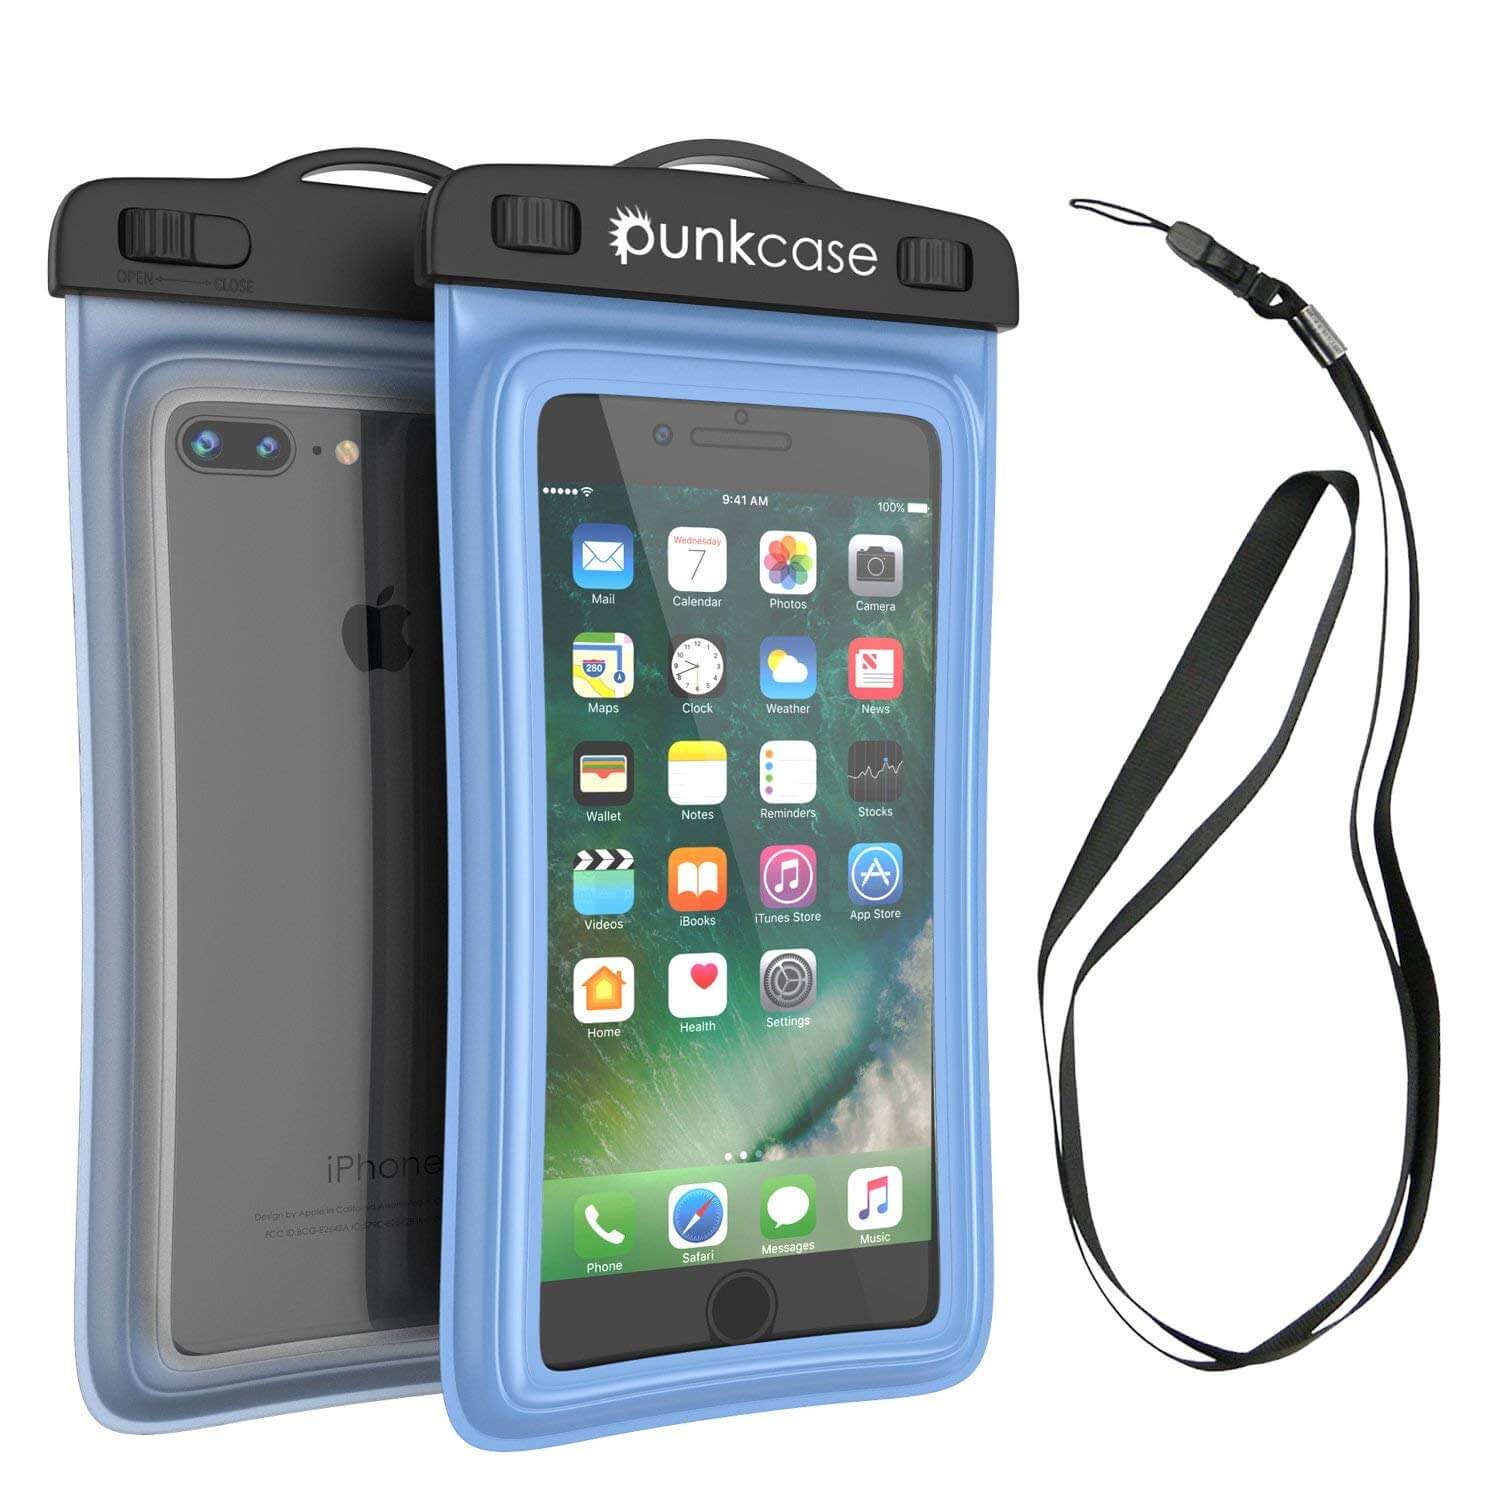 Waterproof Phone Pouch, PunkBag Universal Floating Dry Case Bag for most  Cell Phones [Black]